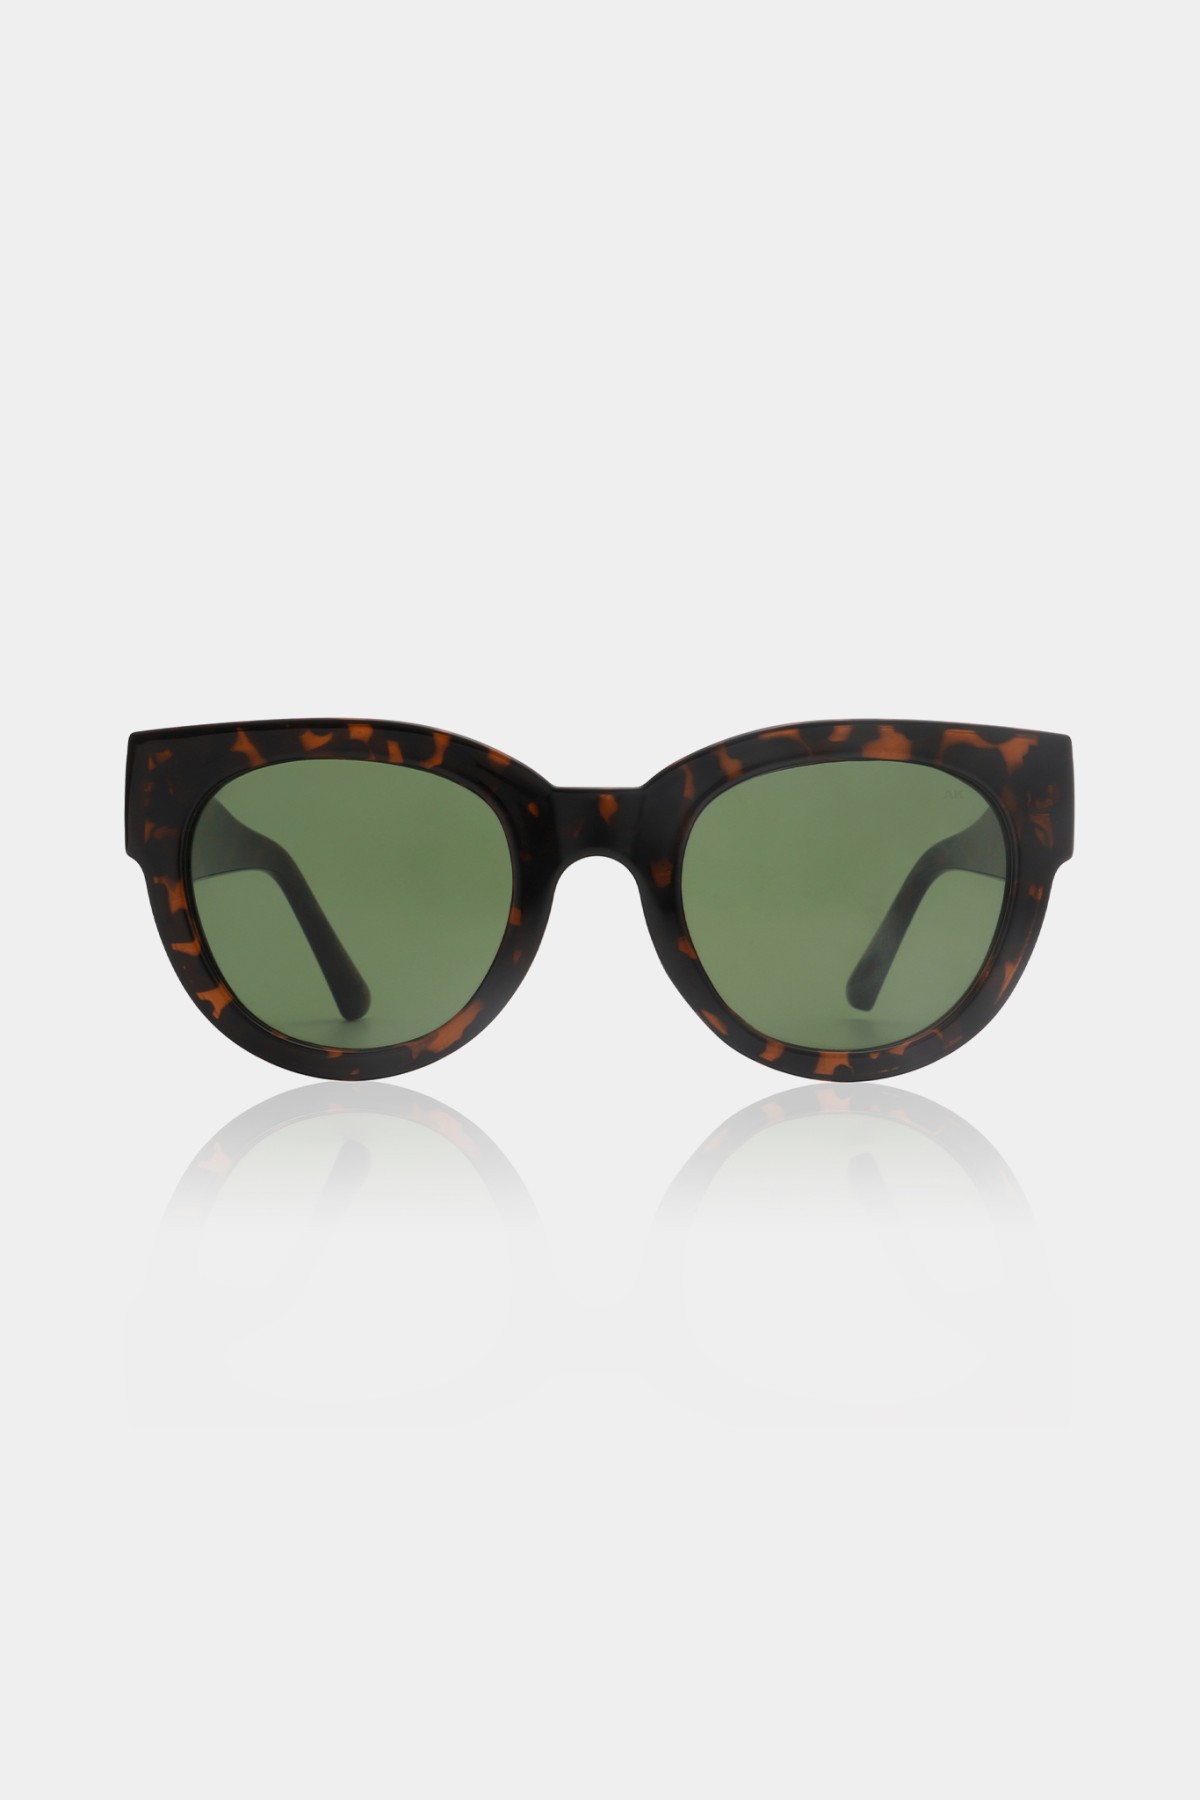 SUNGLASSES TORTOISE - LILLY – UV 400 PROTECTION